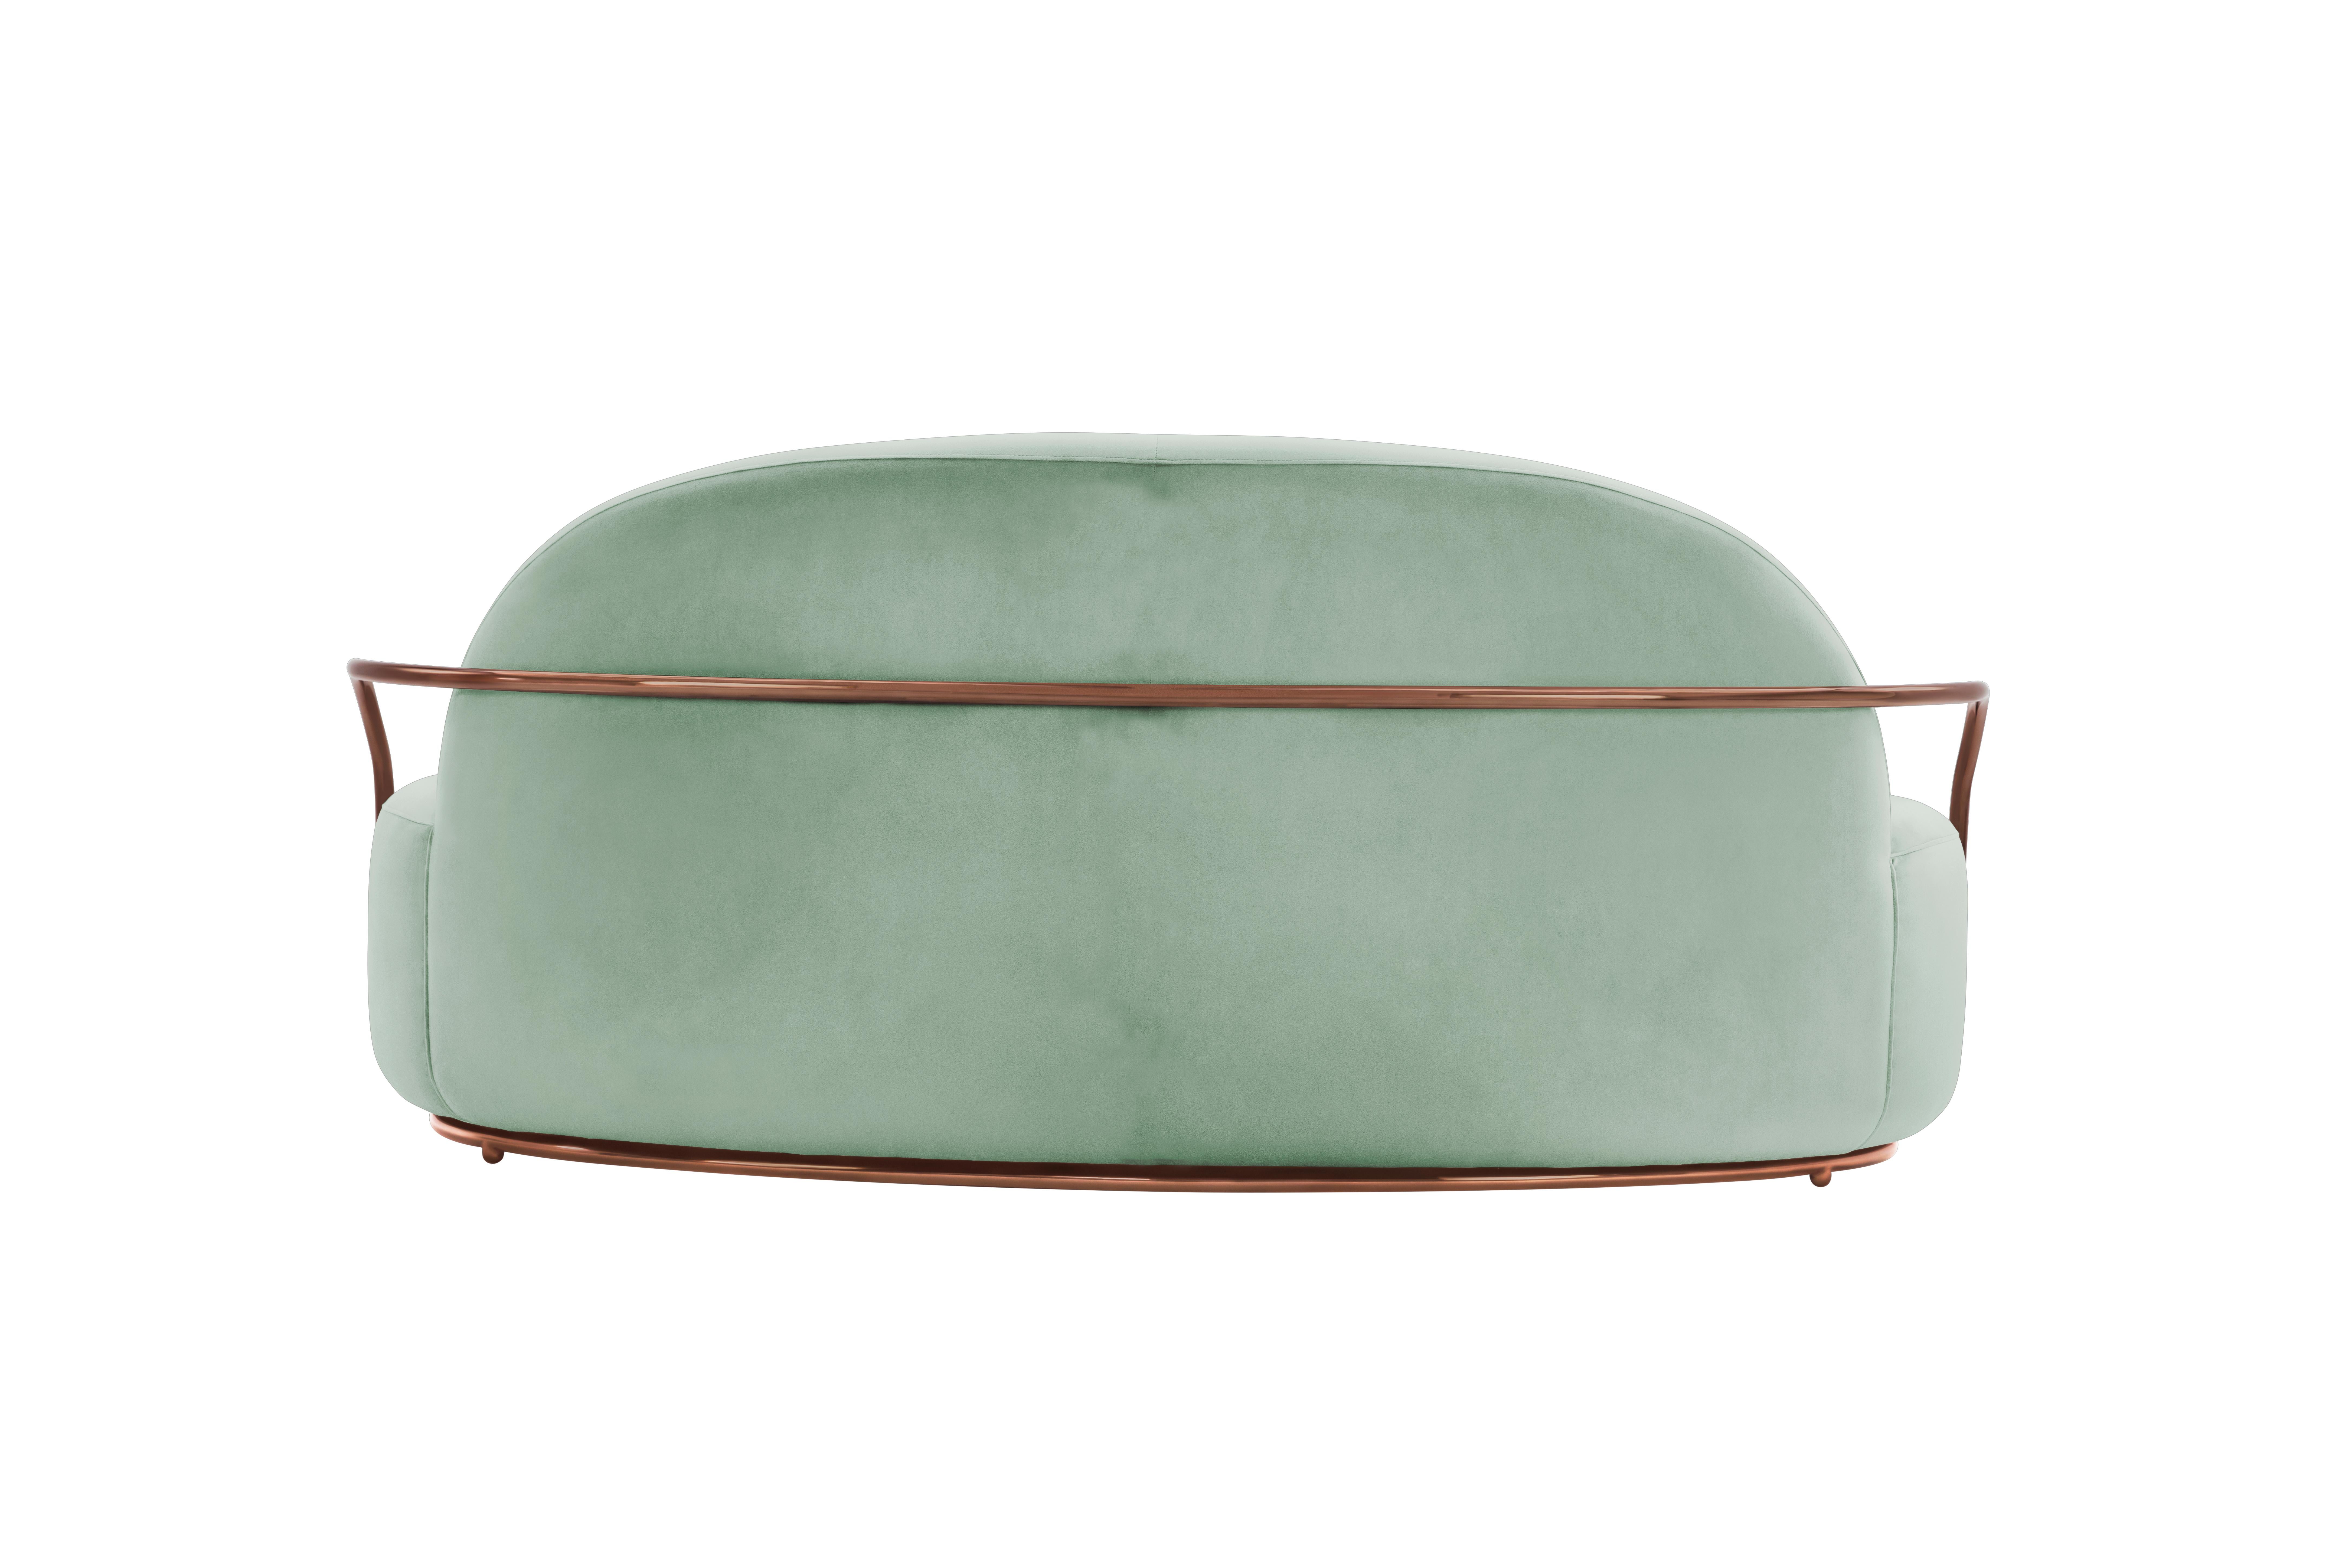 Hand-Crafted Orion 3 Seat Sofa with Plush Mint Green Velvet and Rose Gold Arms by Nika Zupanc For Sale